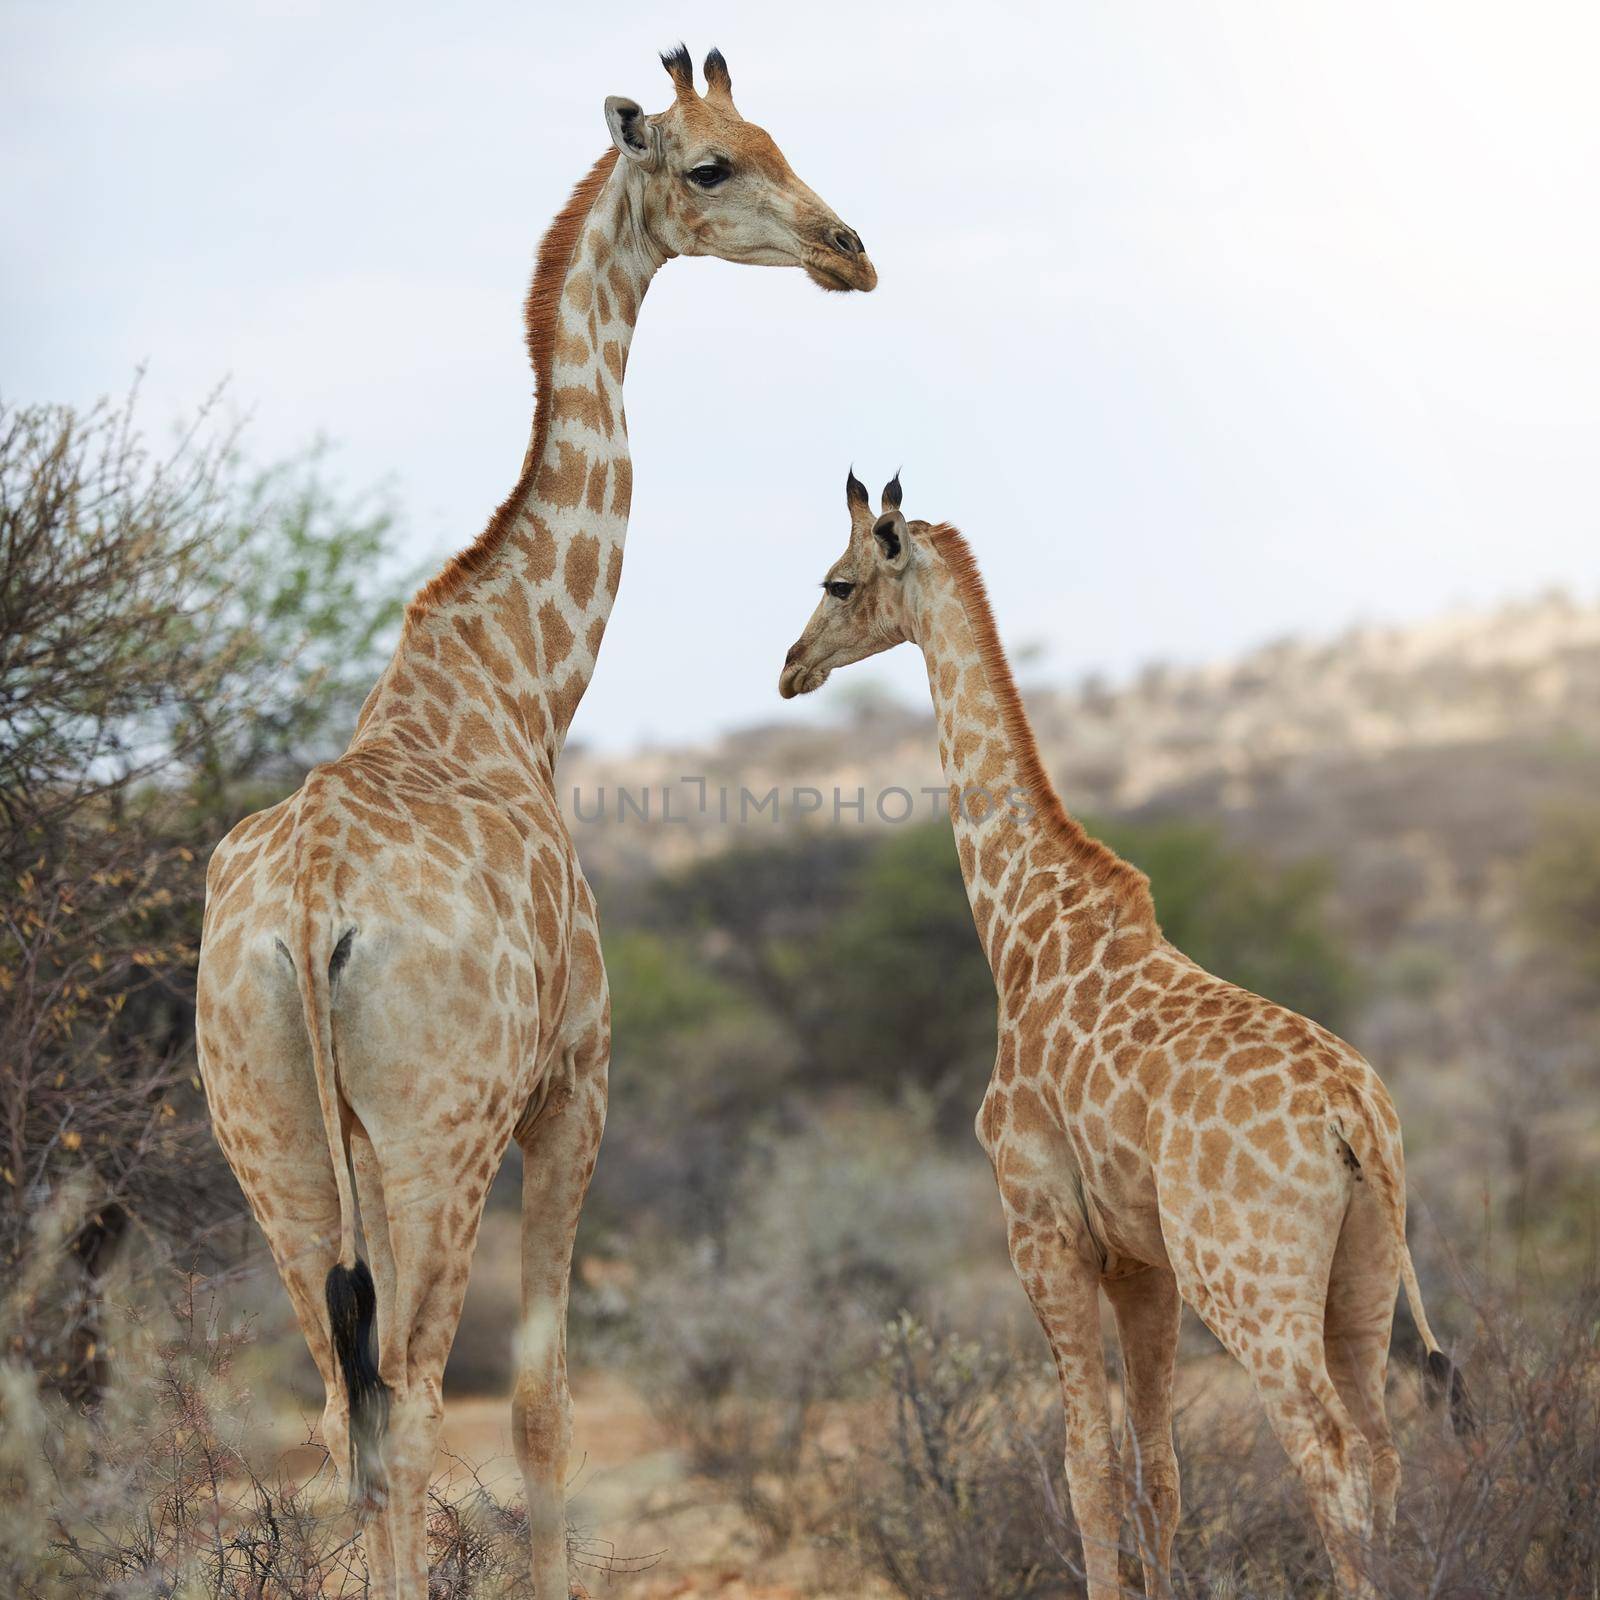 Where the wild things are. two giraffes standing in their natural habitat